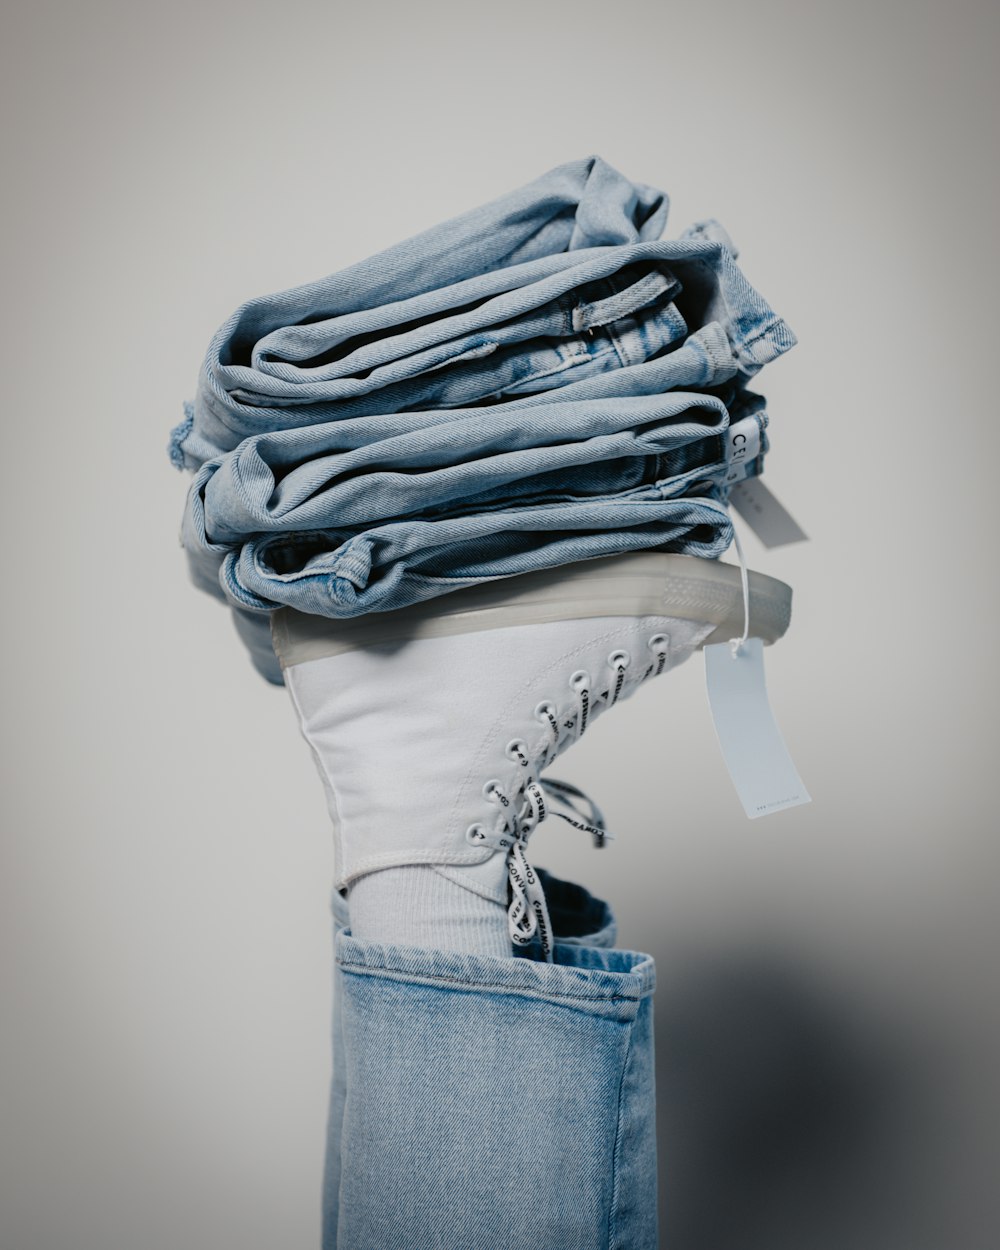 a stack of folded jeans in a jeans pocket